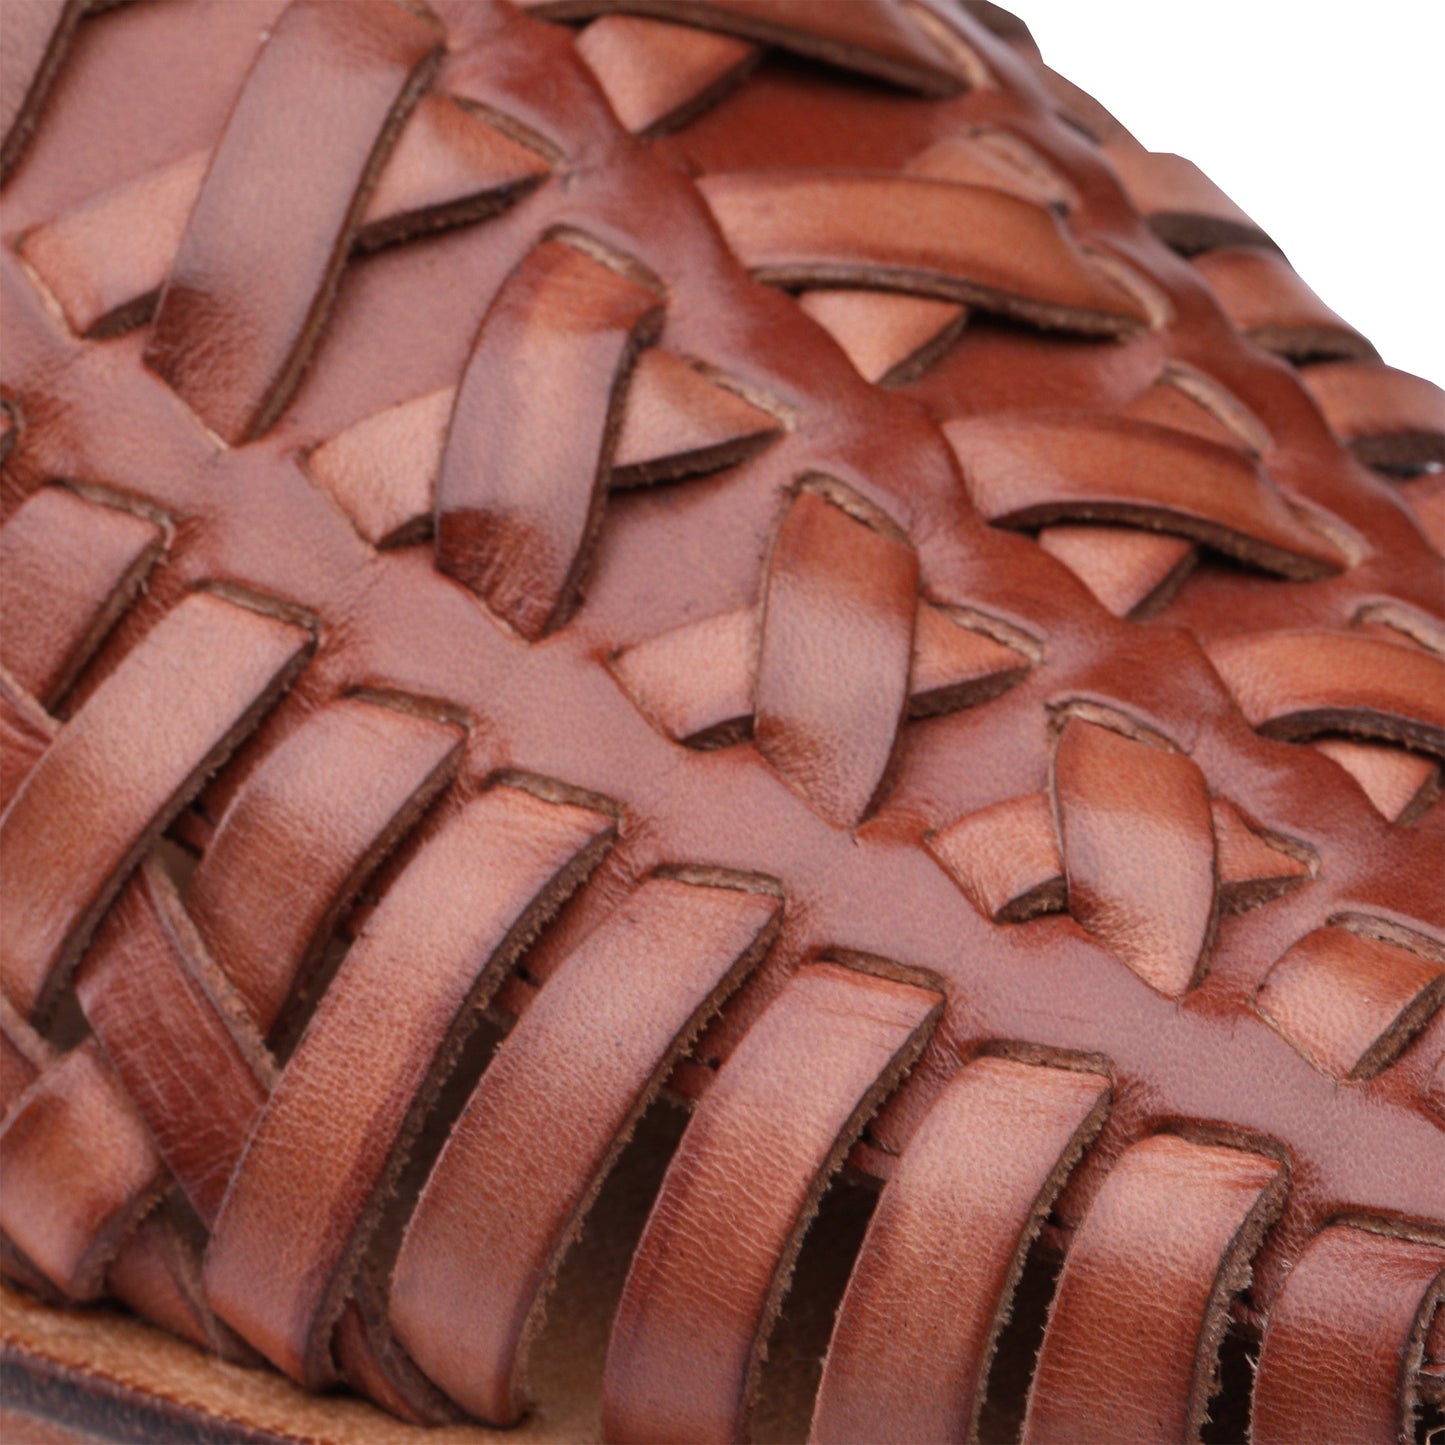 Brown woven sandals